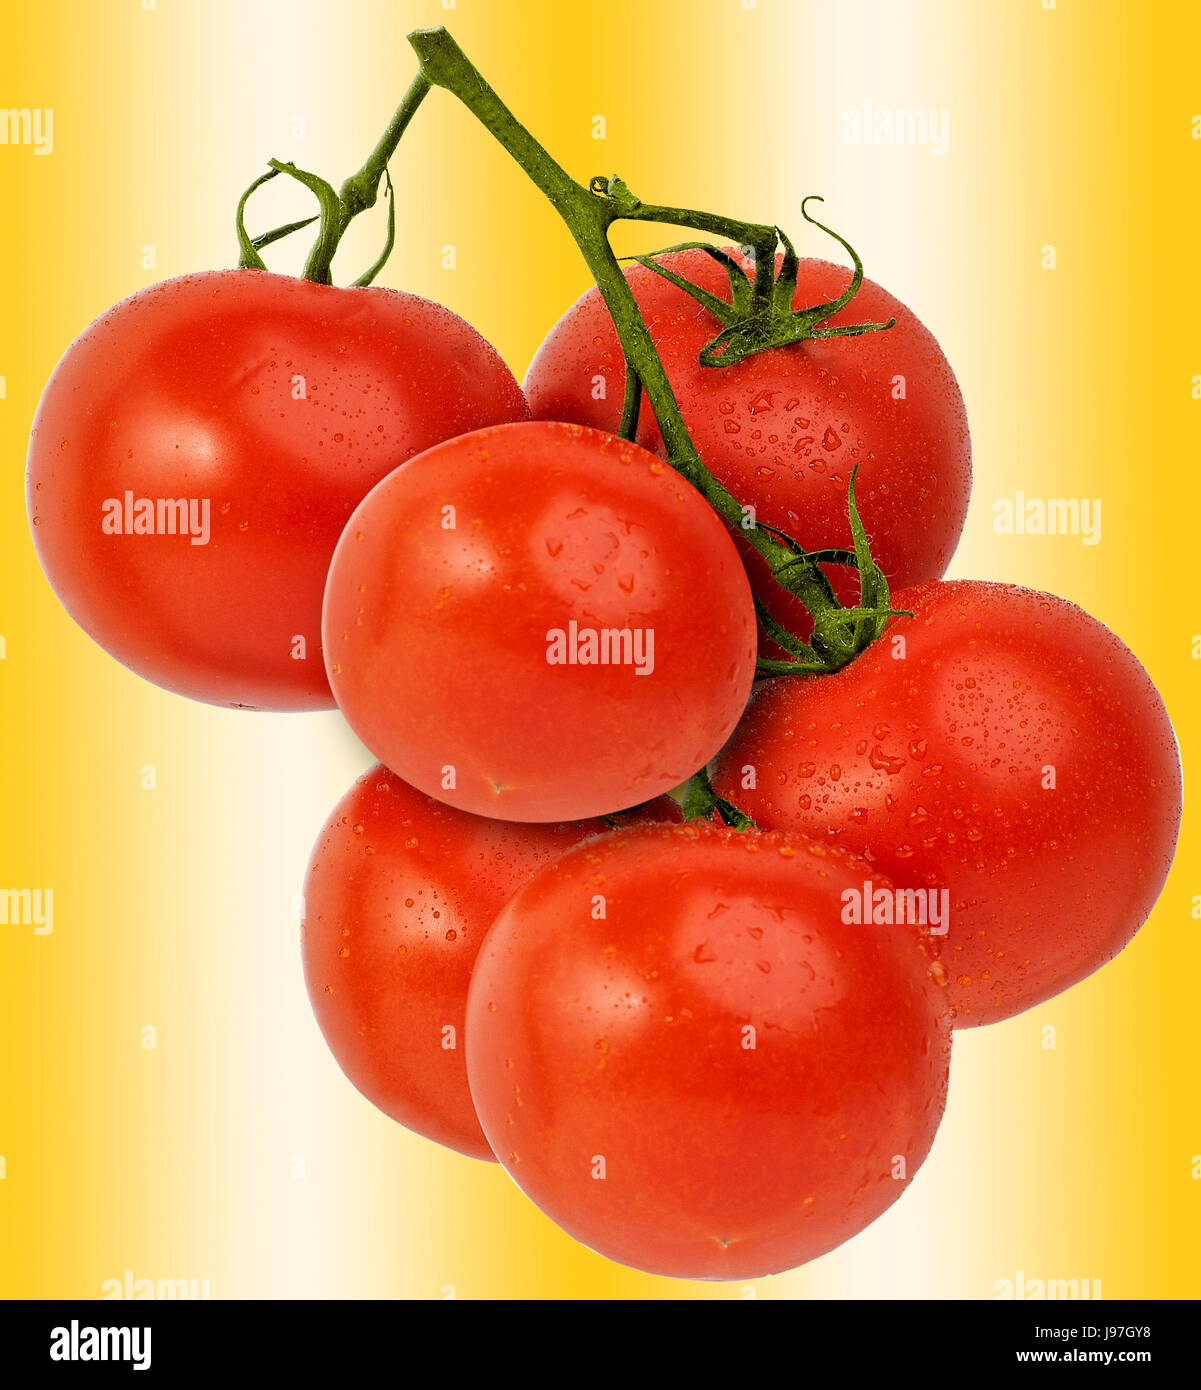 Fresh bright red vine tomatoes, isolated against a bright gold colored background. Stock Photo